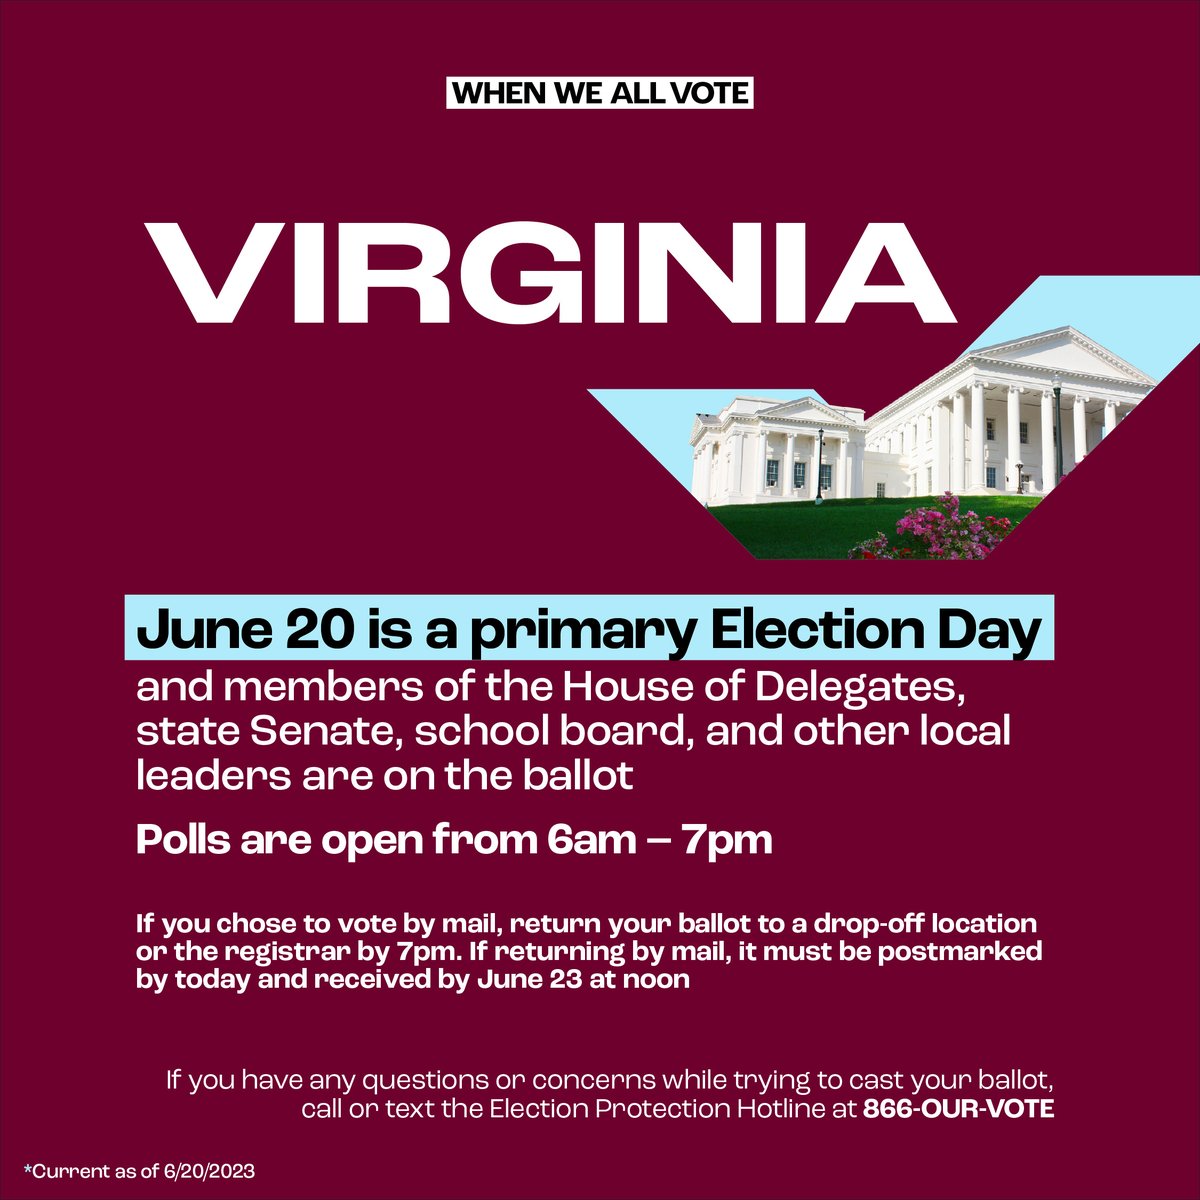 Today — Tuesday, June 20, 2023 — is a primary #ElectionDay in Virginia. Polls are open from 6AM - 7PM and you can visit weall.vote/virginia to look up your polling 📍. #Virginia